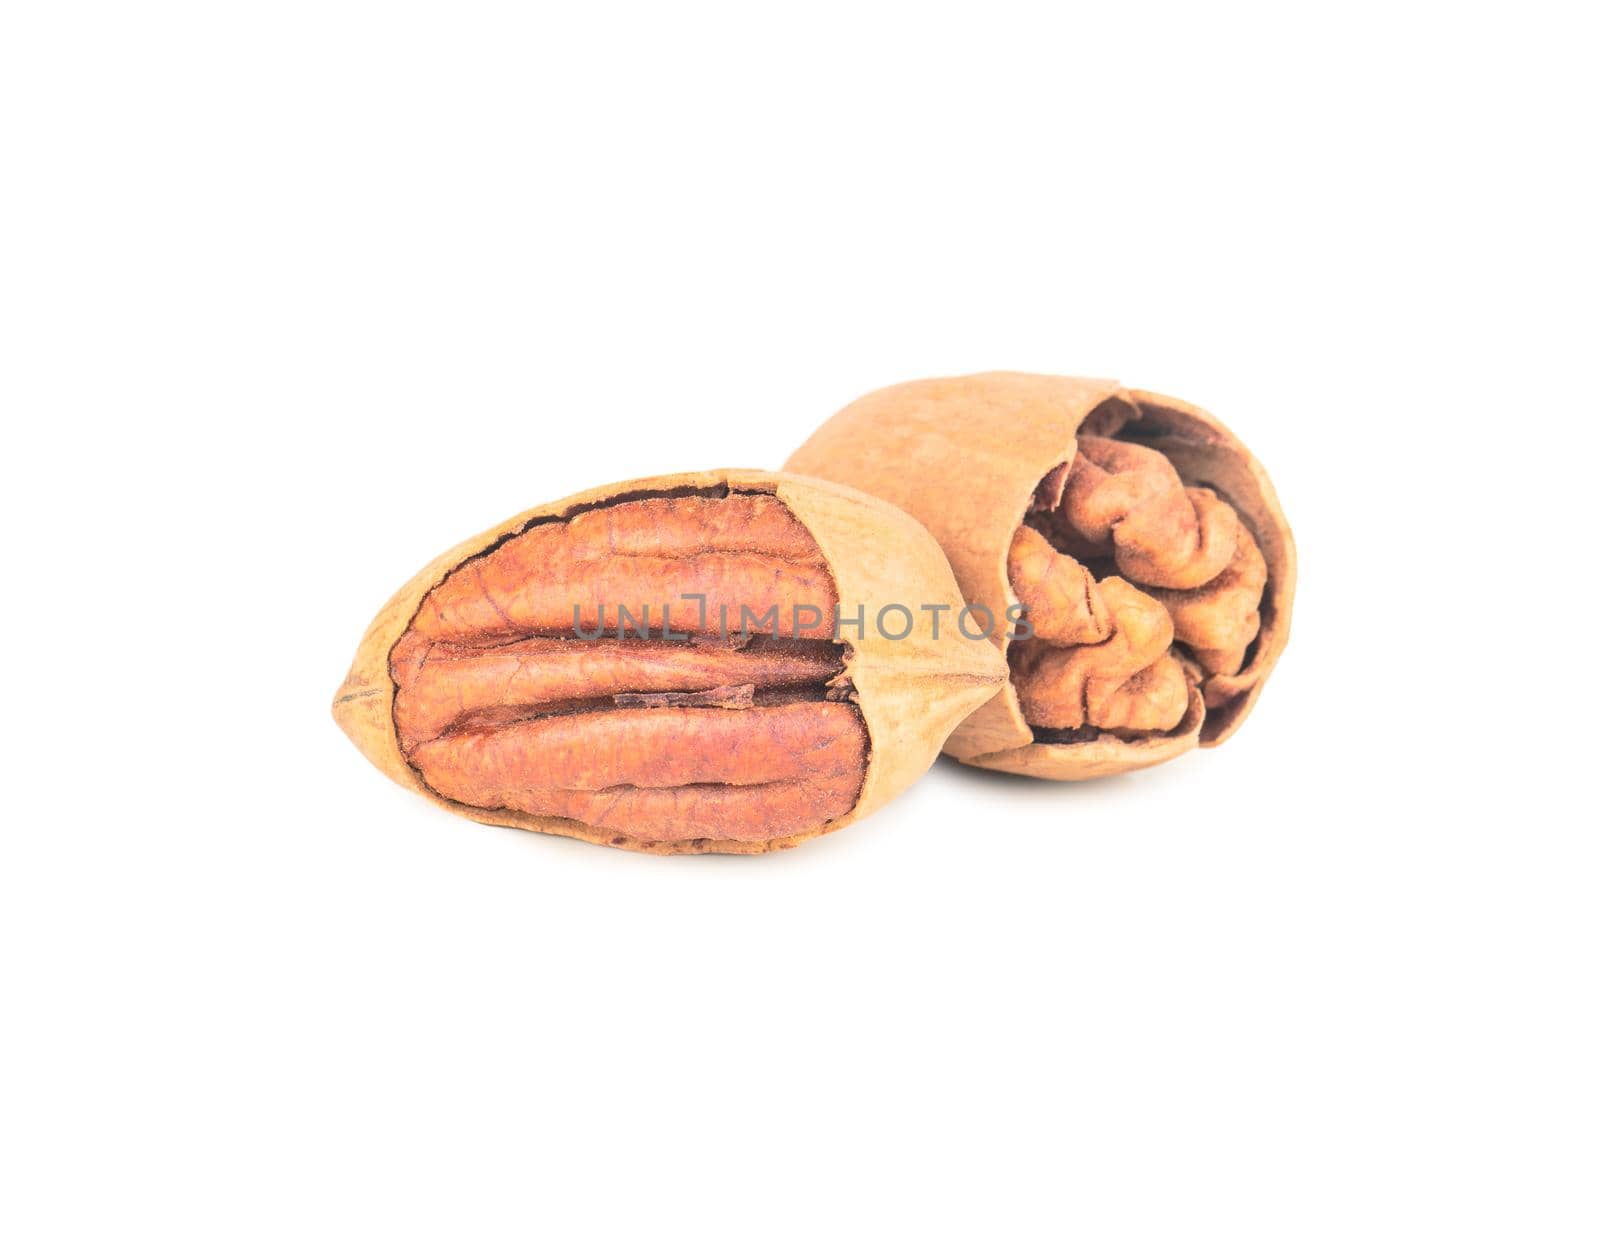 Two shelled pecans by andregric